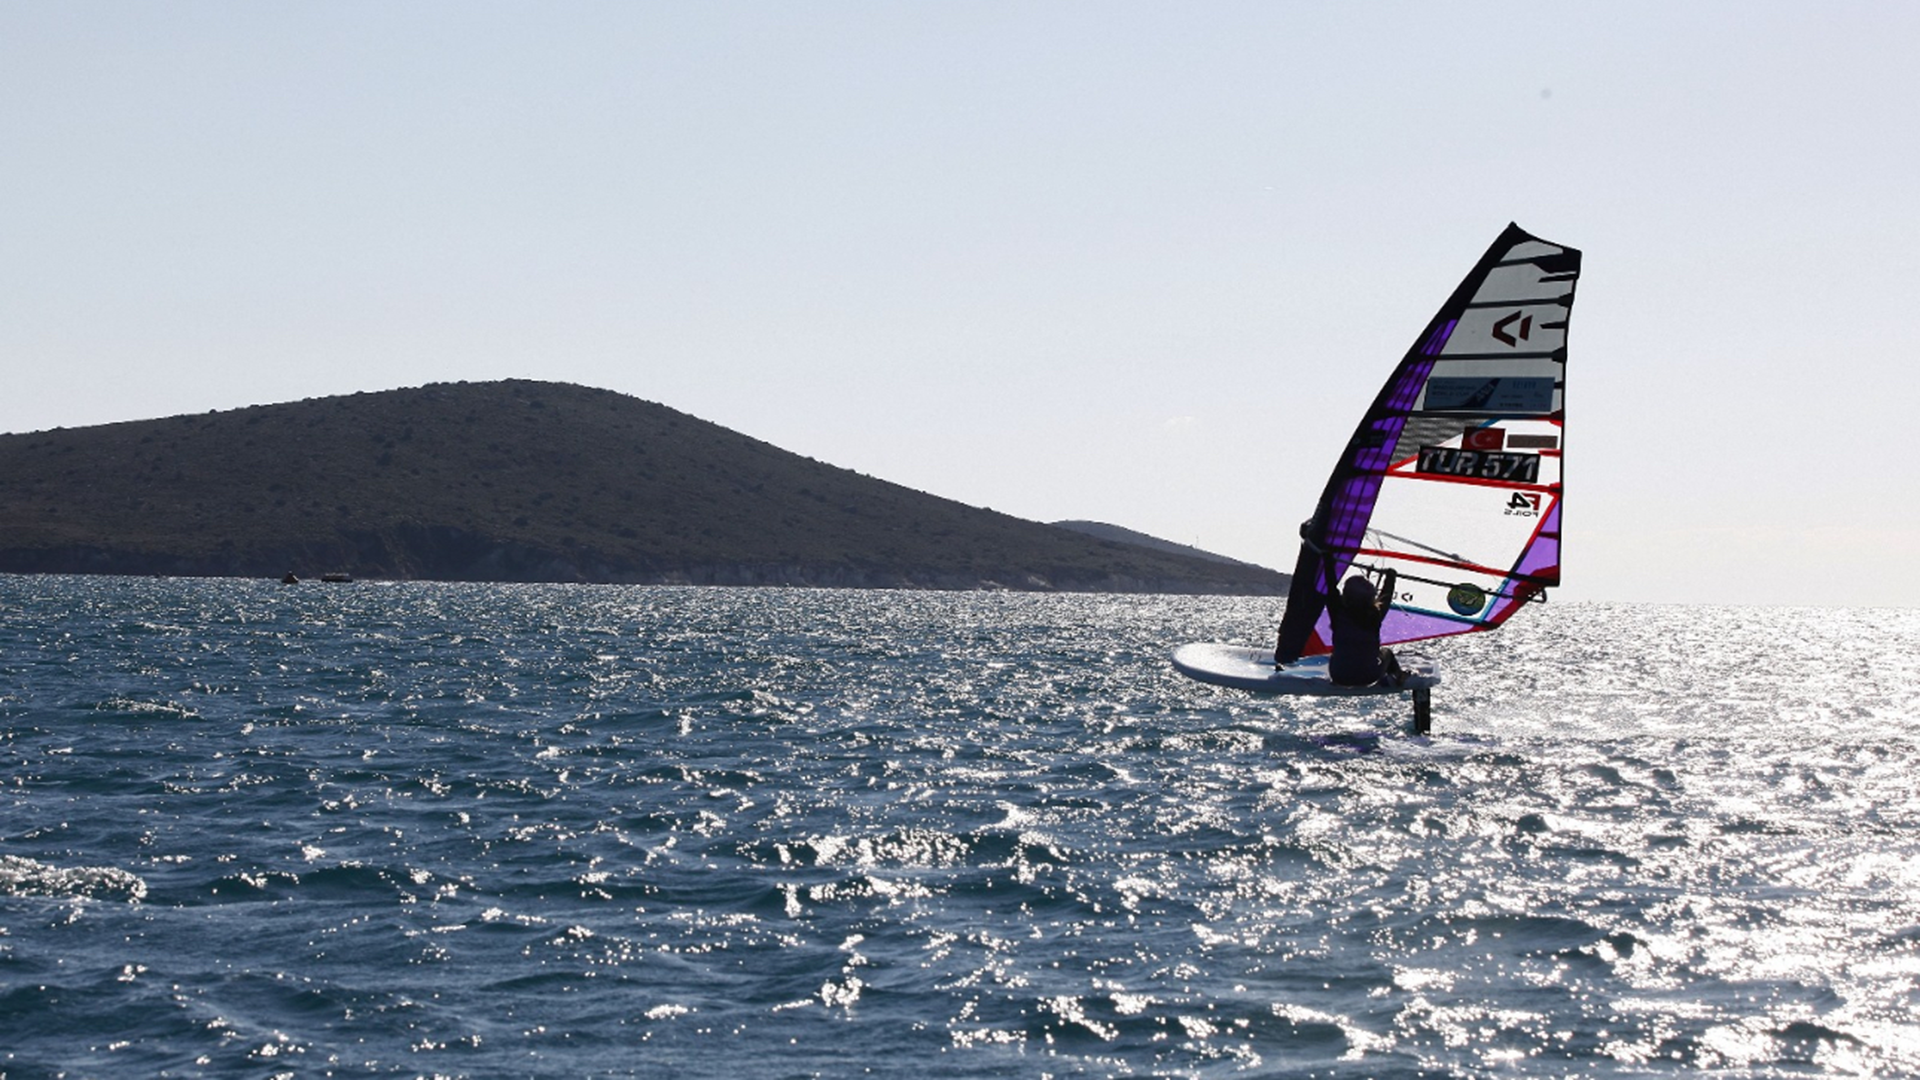 elif ercan We are welcoming Elif Ercan to the F4 Windsurf Team!